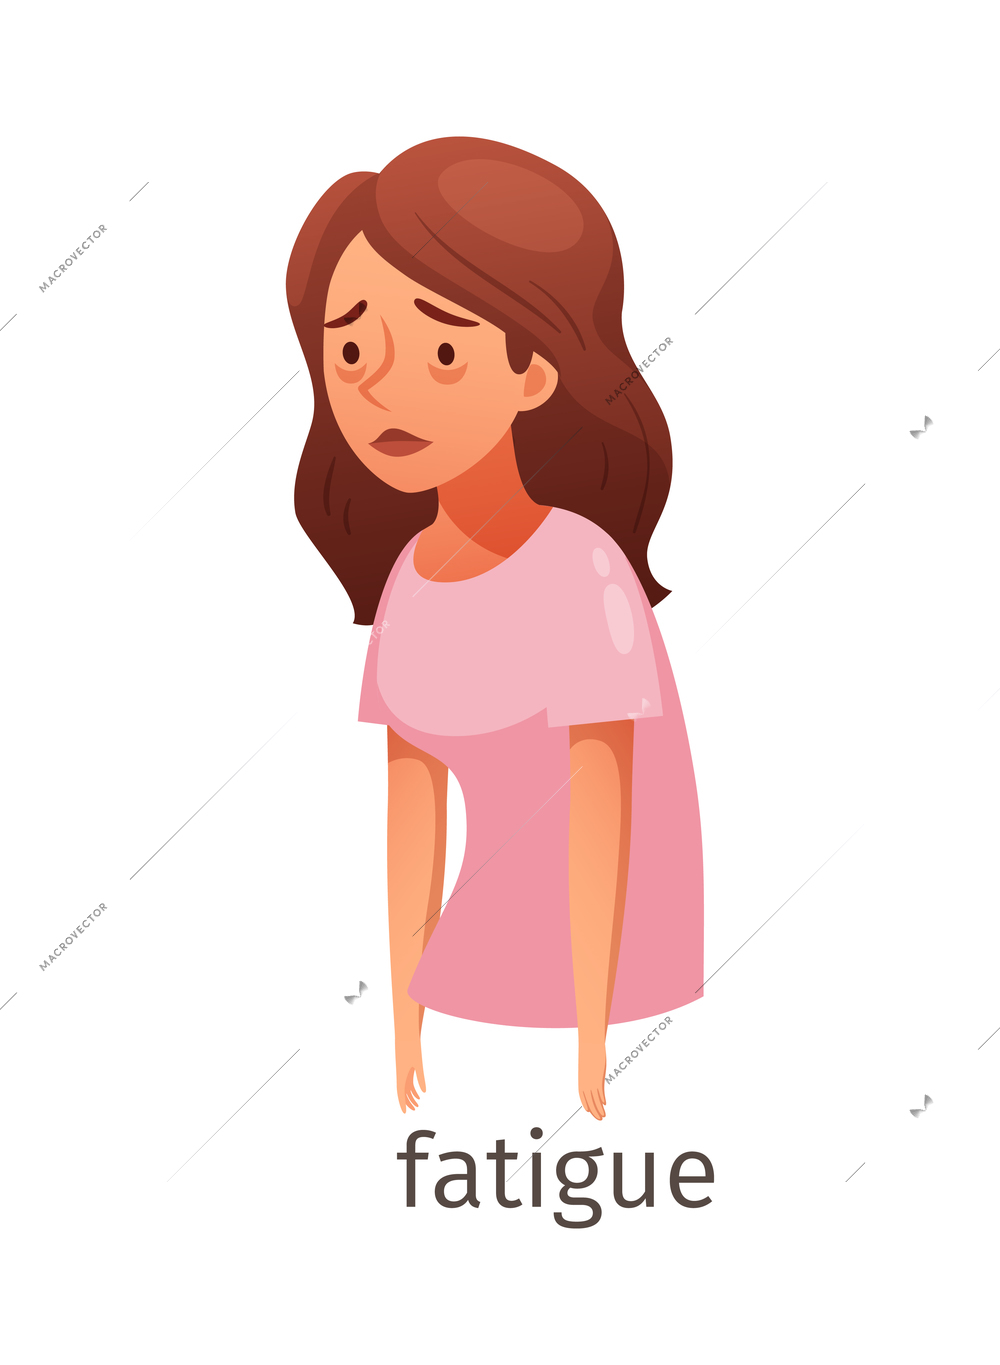 Diabetes cartoon composition with character of sick woman suffering from fatigue vector illustration